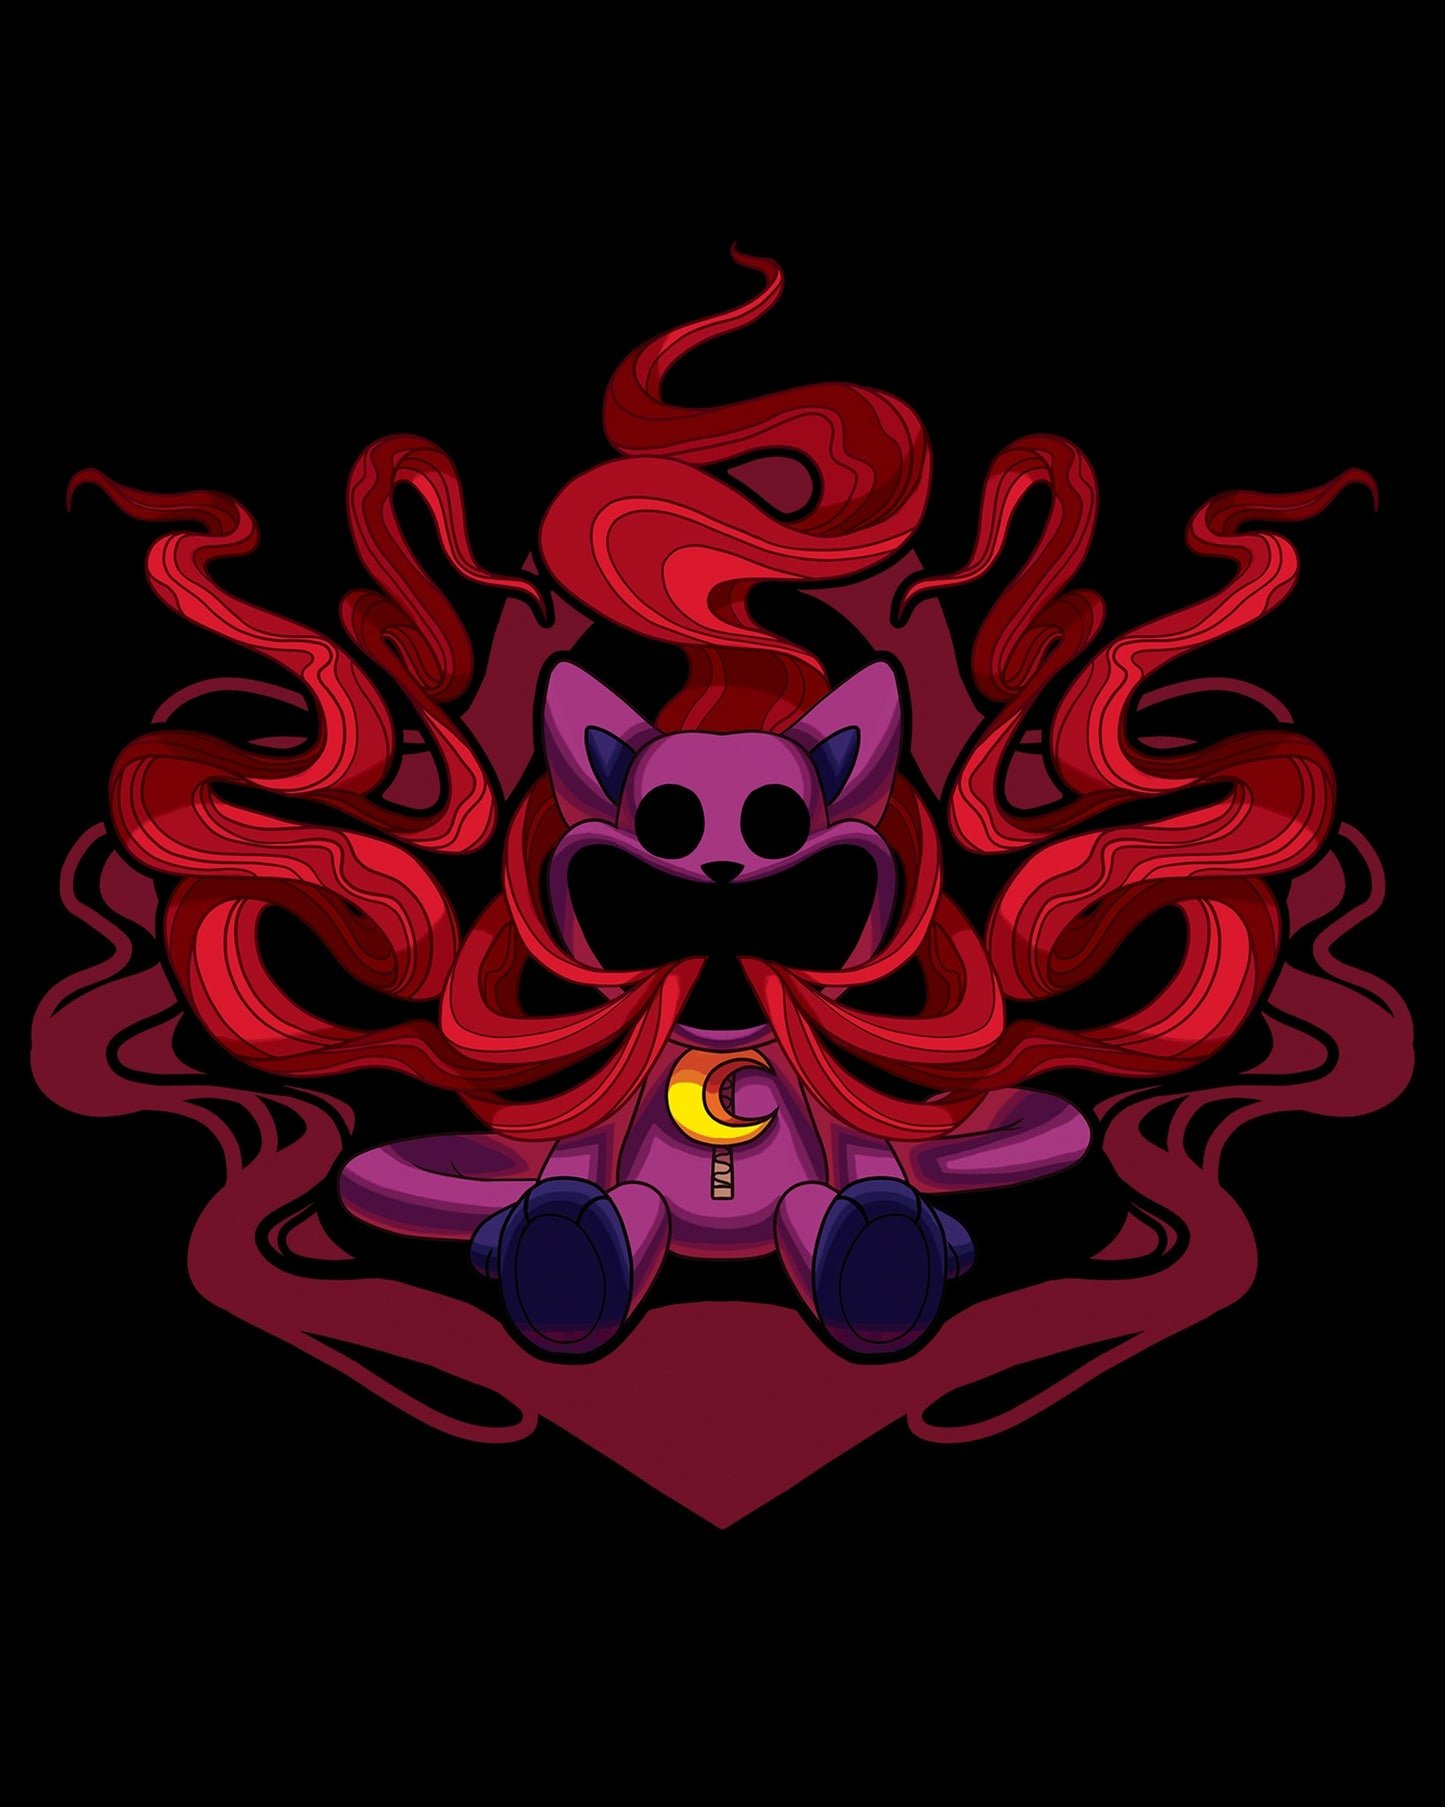 Illustration of CatBee character from Poppy Playtime video game with vibrant red tendrils on a dark background, representing the CatNap toy.